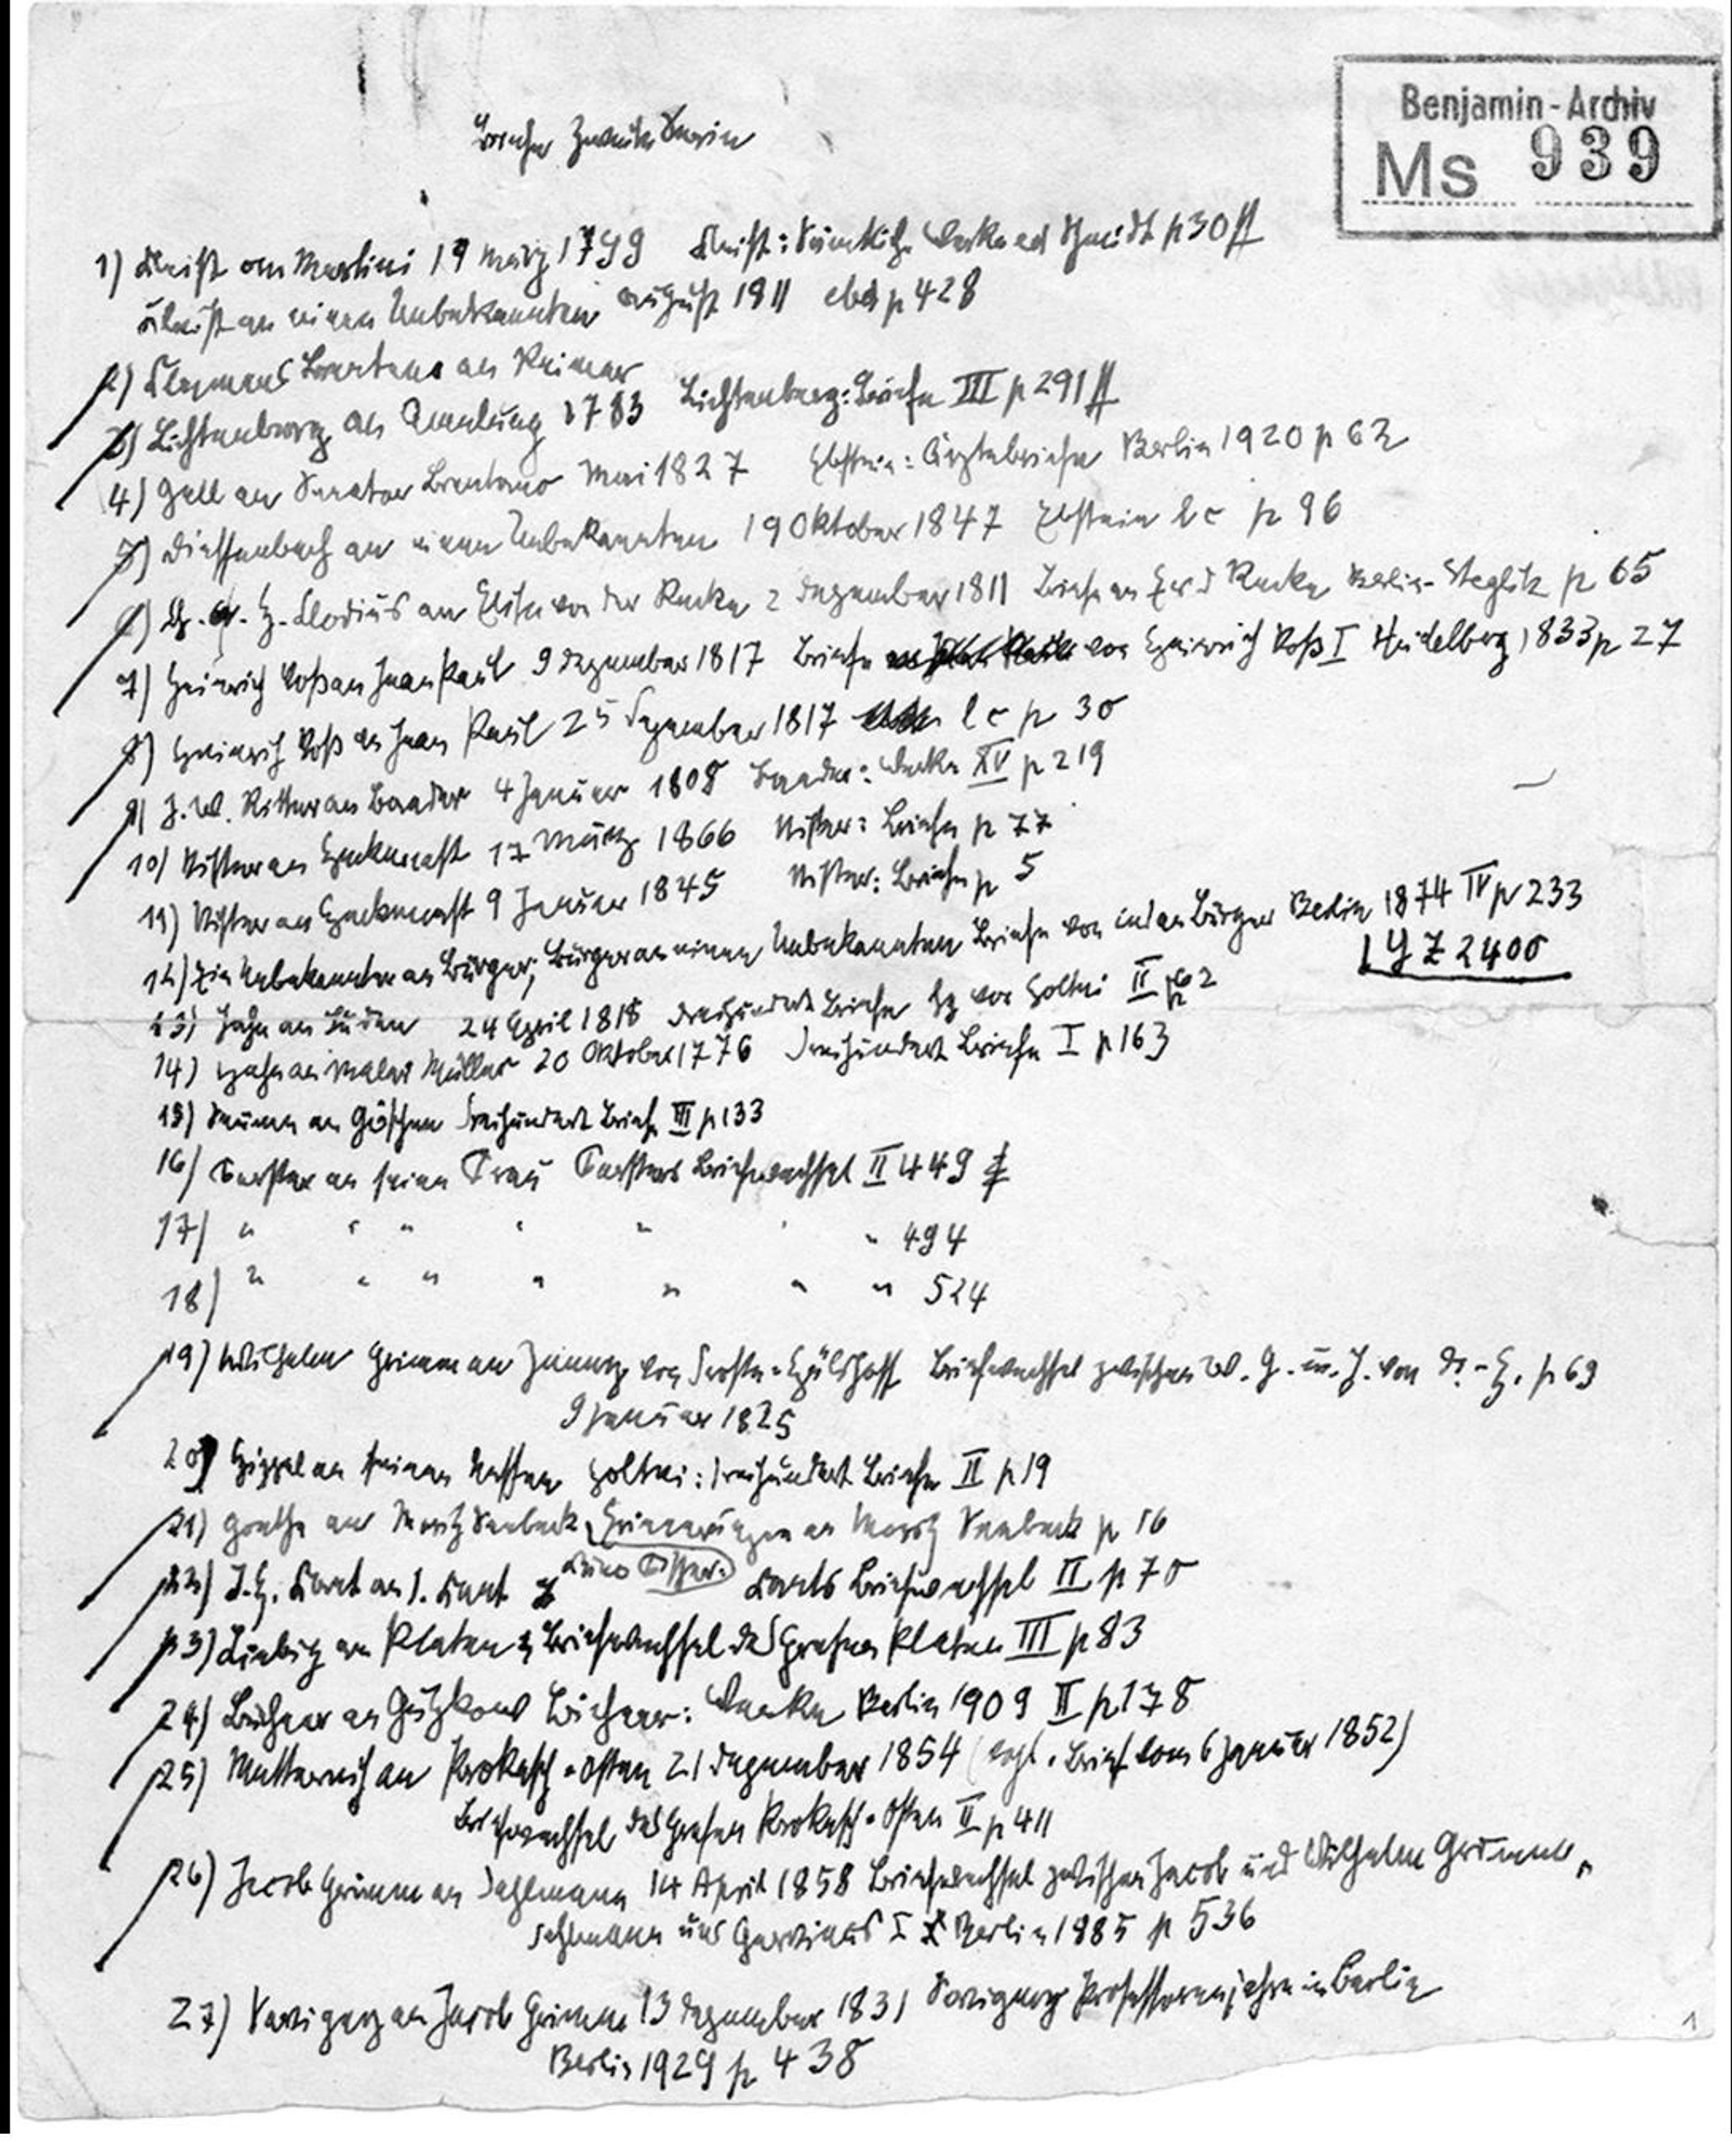 Benjamin's manuscript. List of 31 letters, 13 of which were published in Frankfurt Zeitung between April 1931 and May 1932 grundrisse.ru  